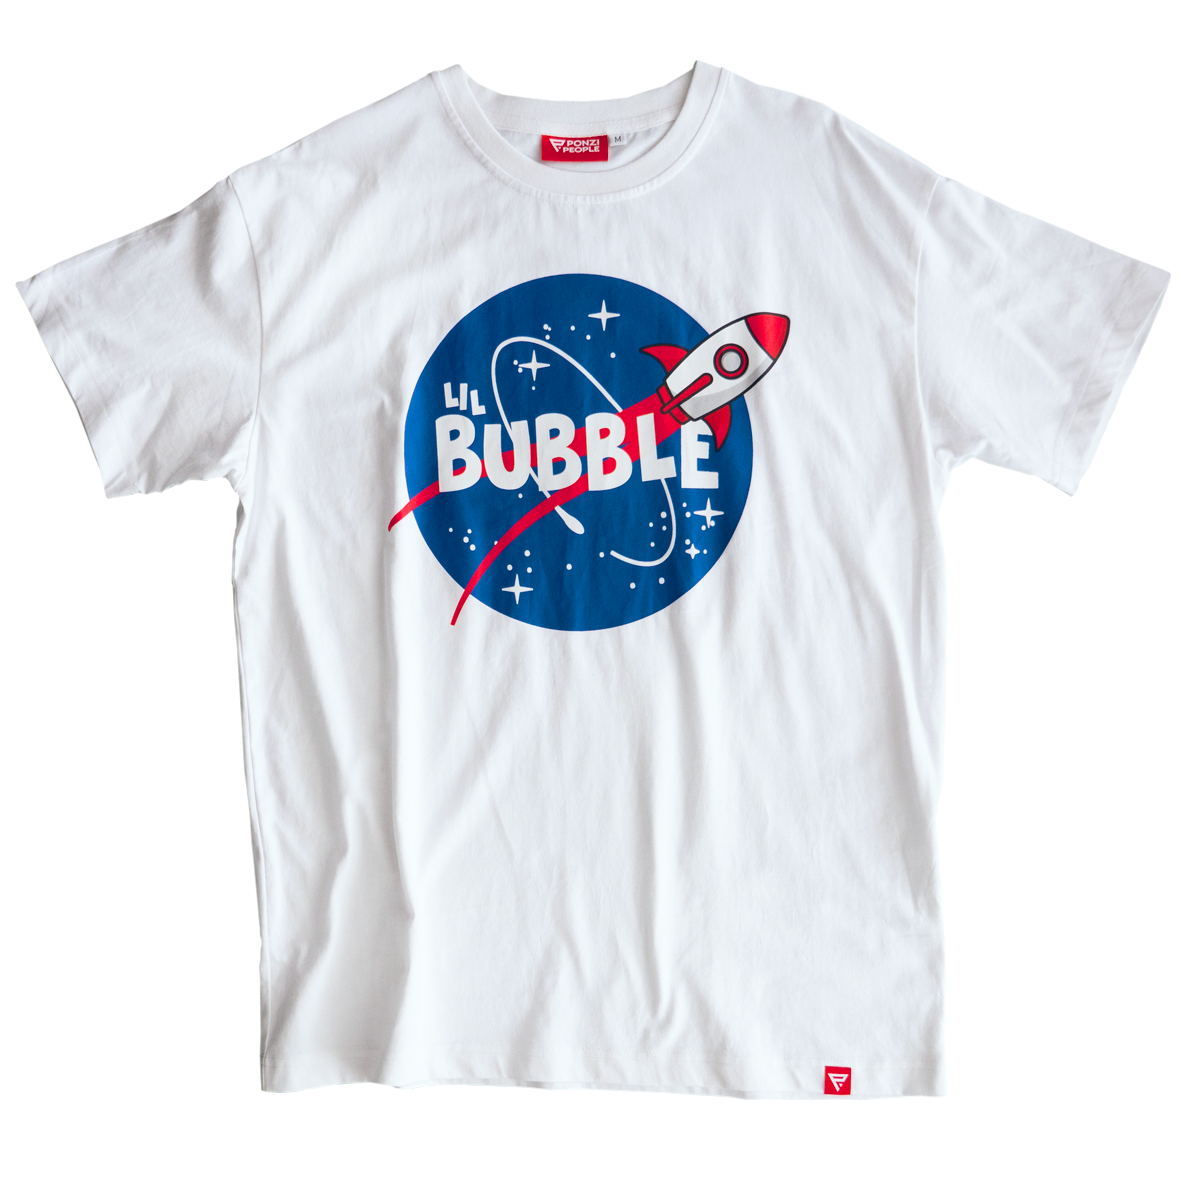 Lil Bubble Tee